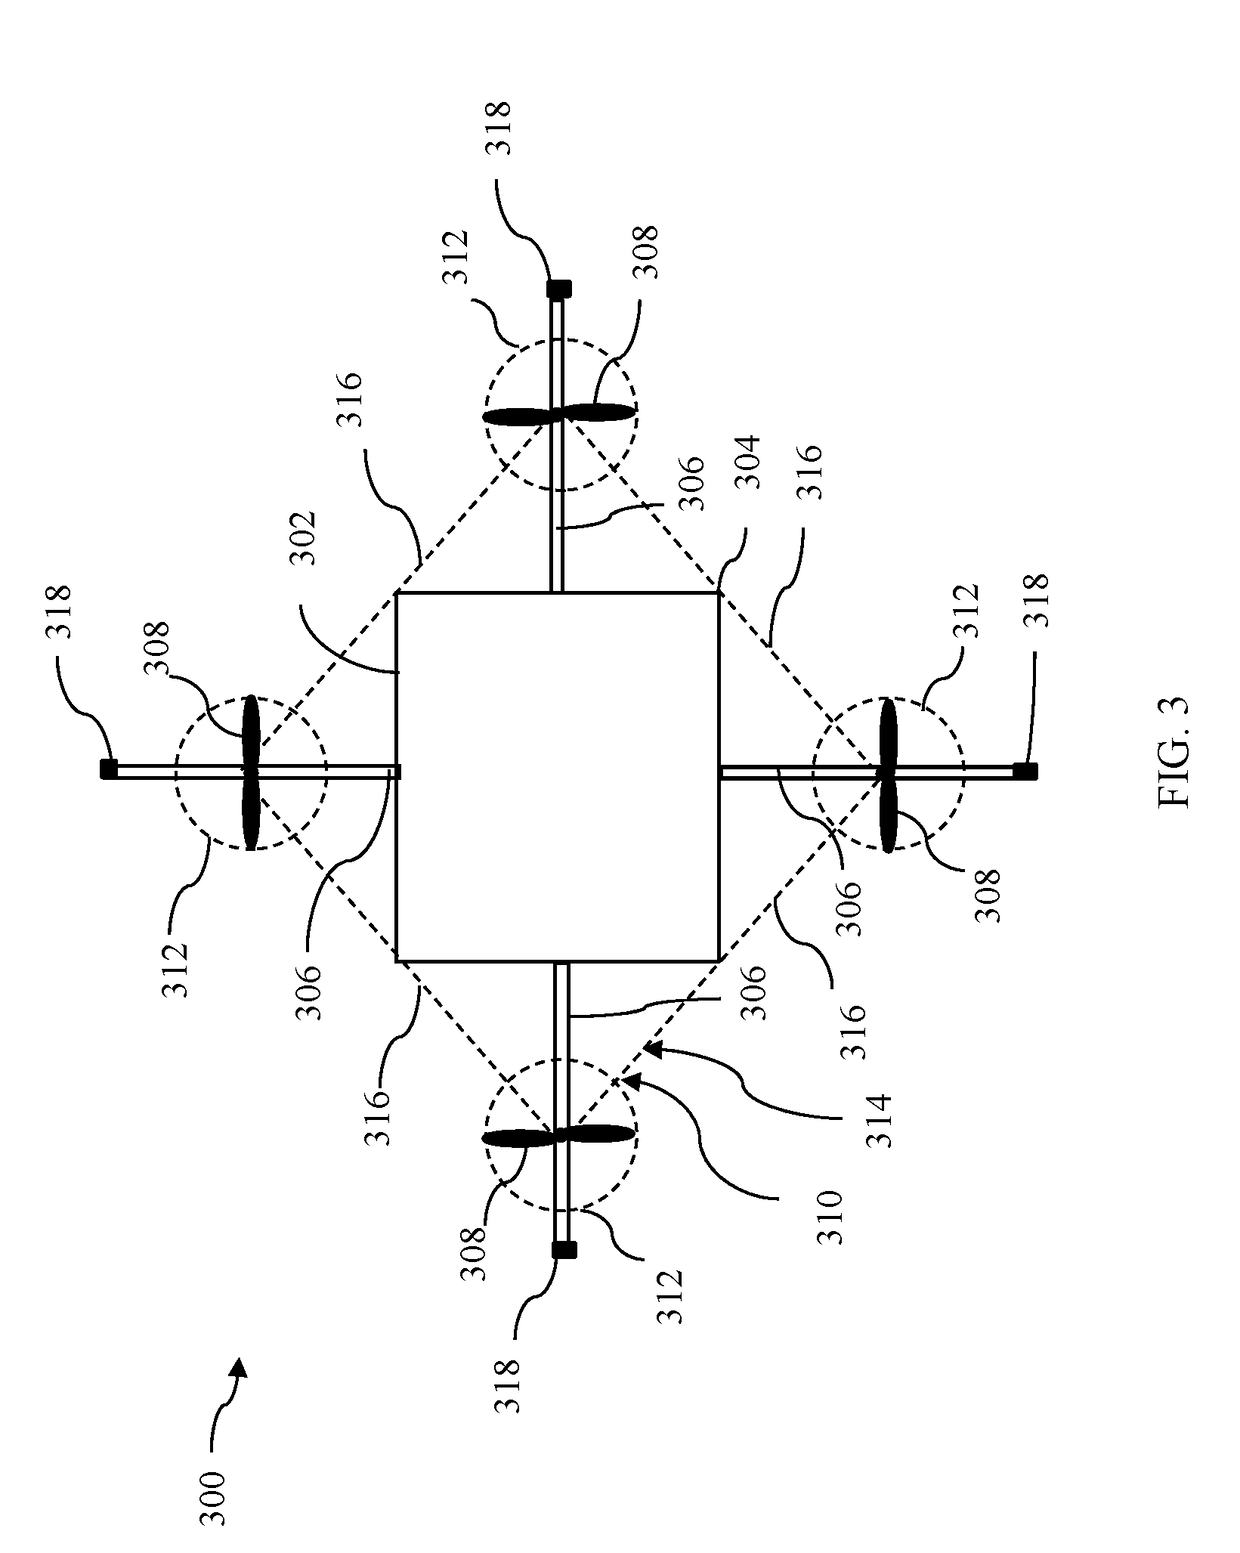 Systems and methods for UAV sensor placement